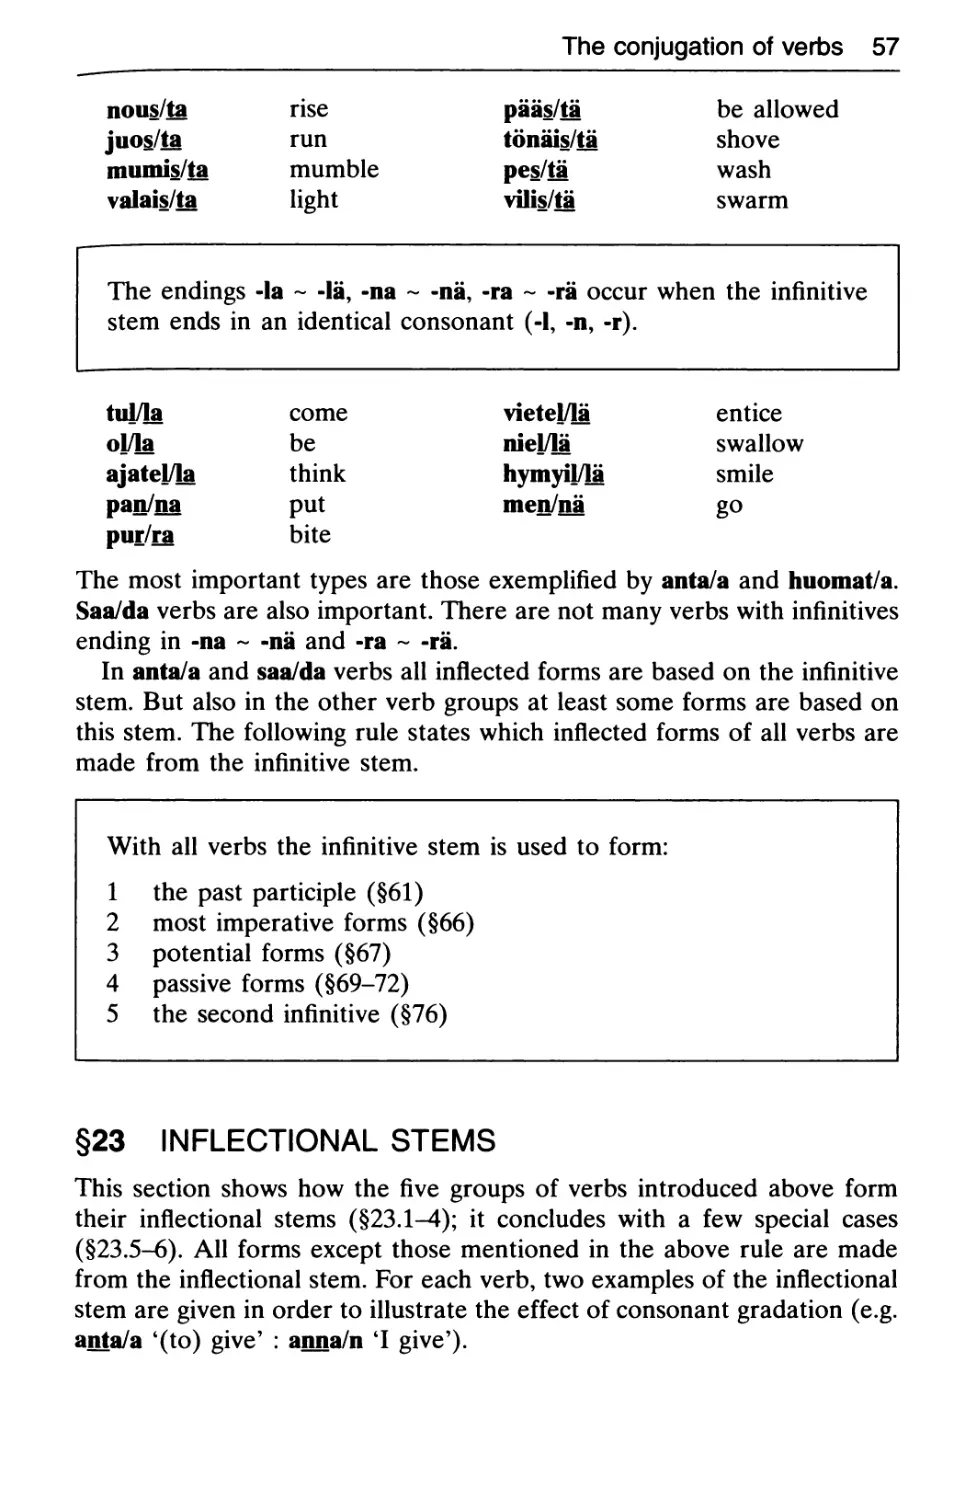 §23 Inflectional stems